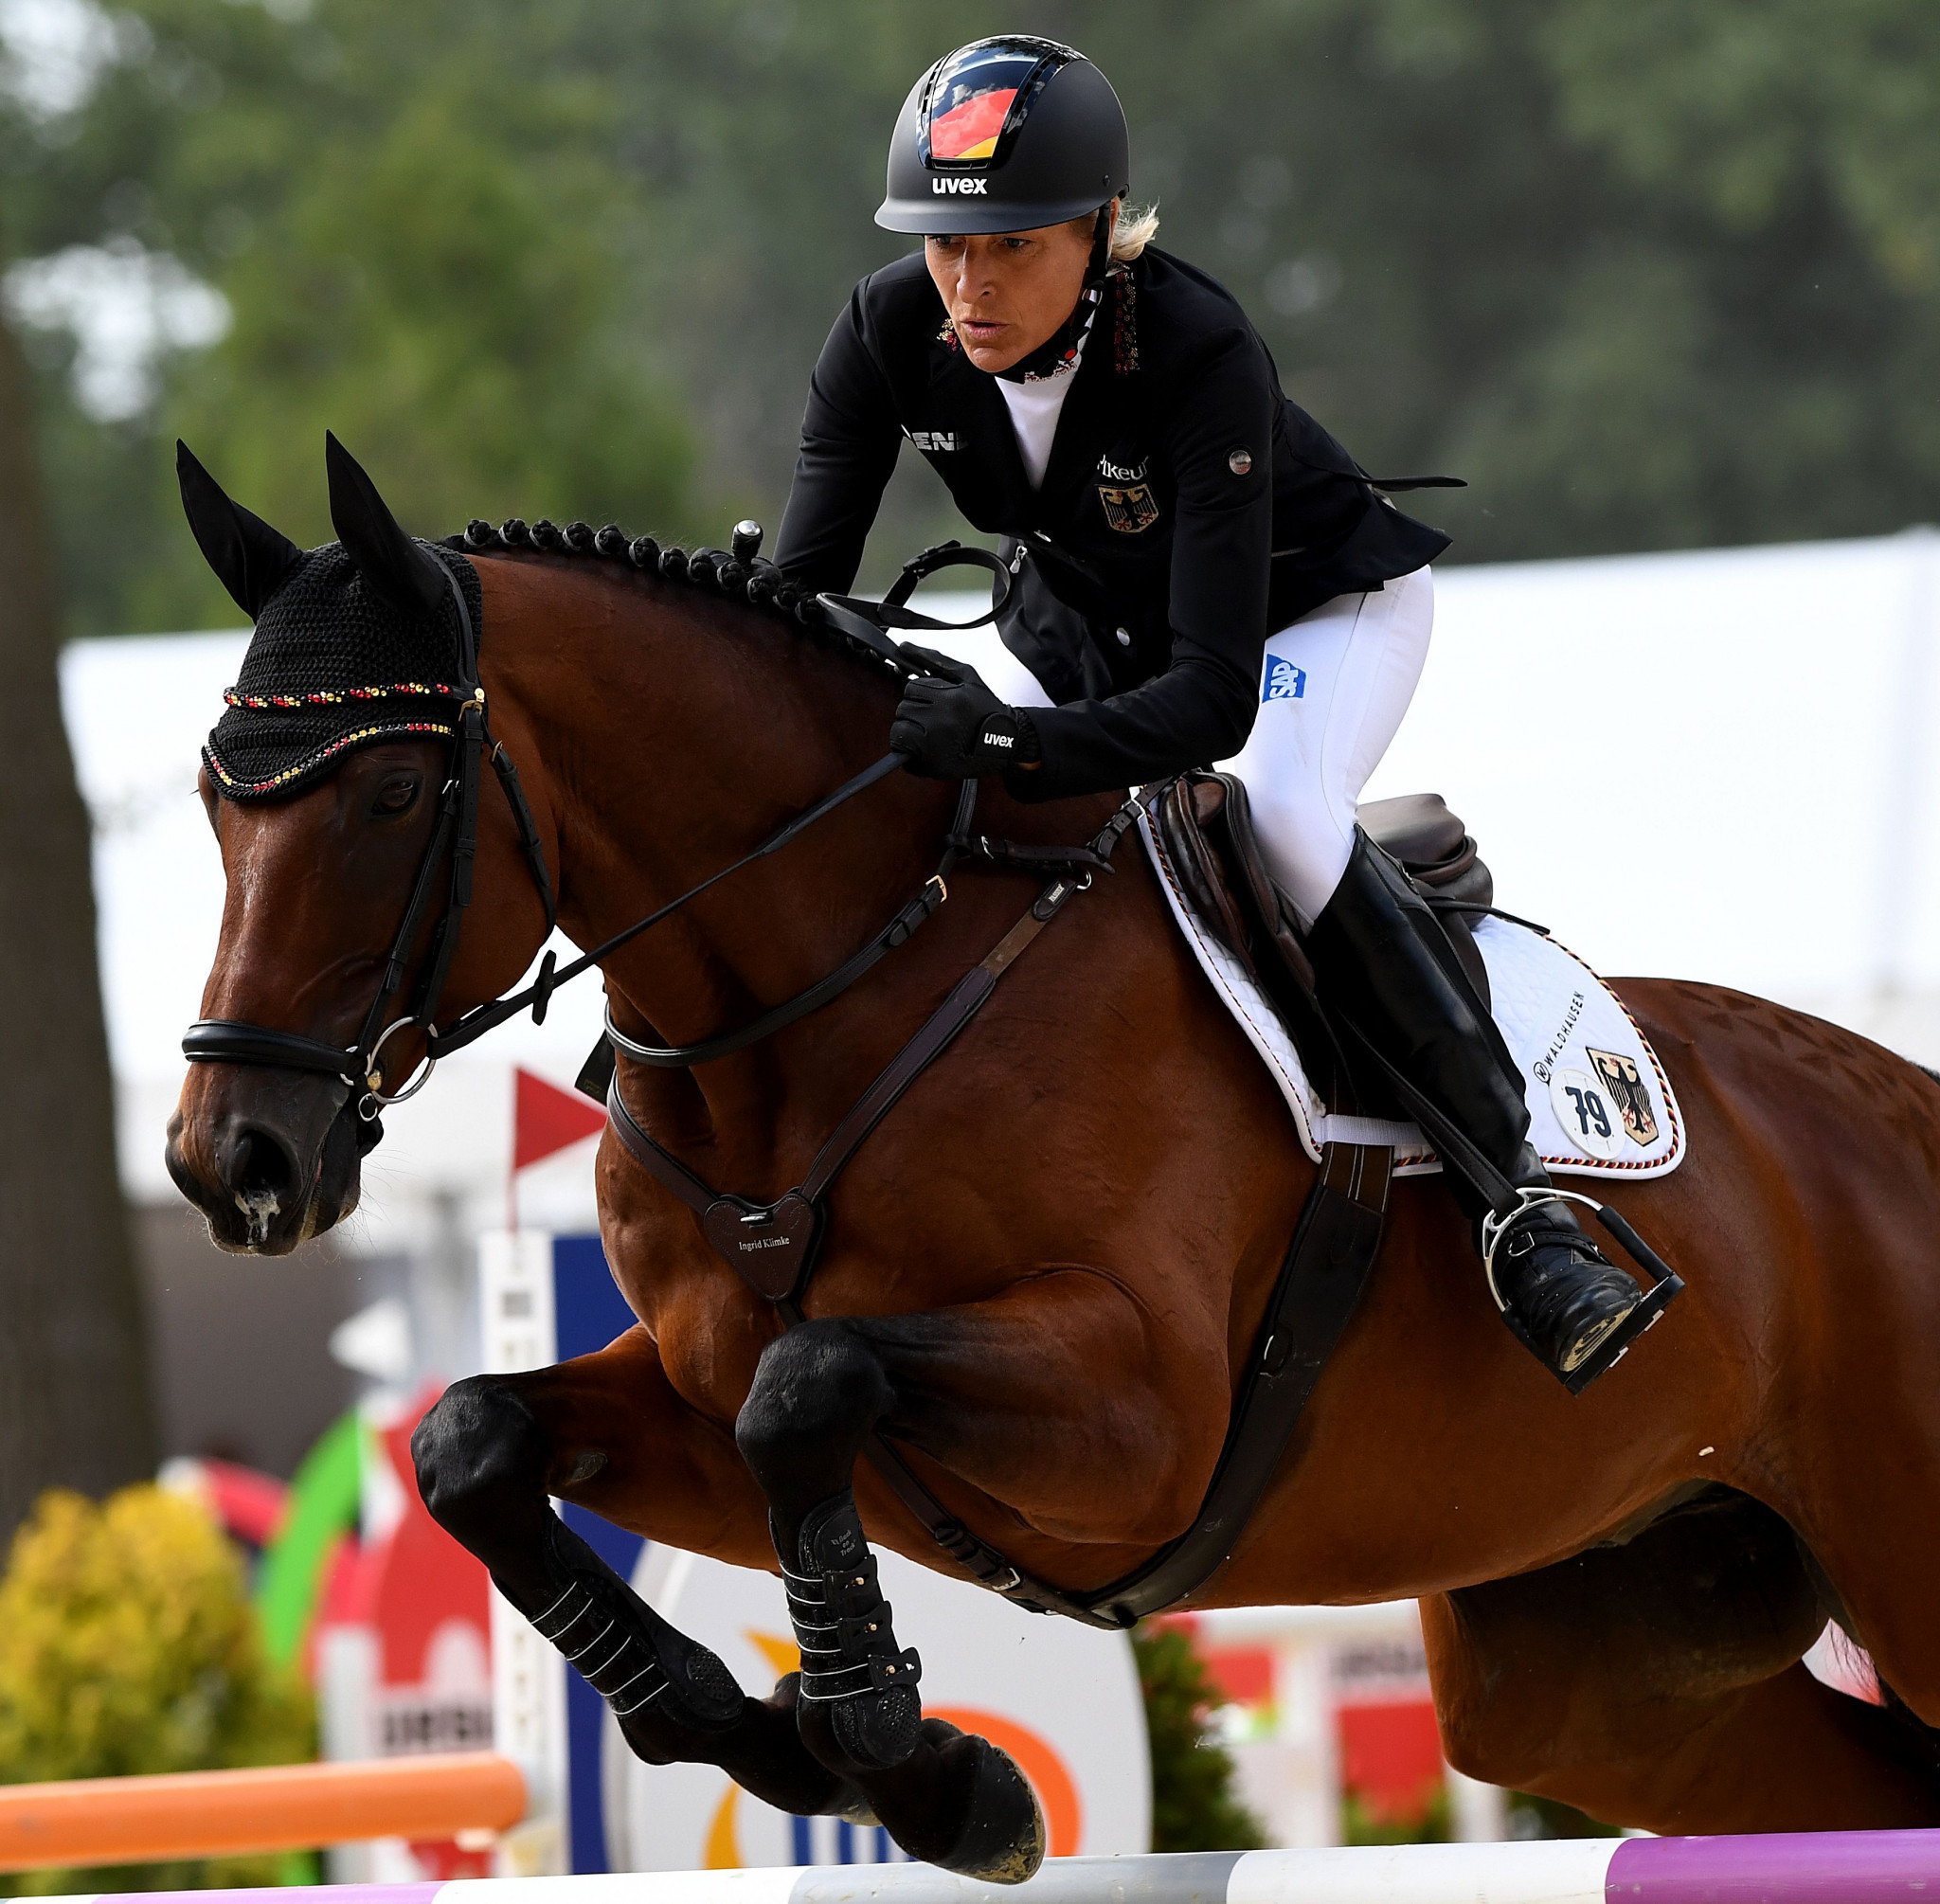 Klimke and Jung to lead charge for hosts Germany at European Eventing Championships